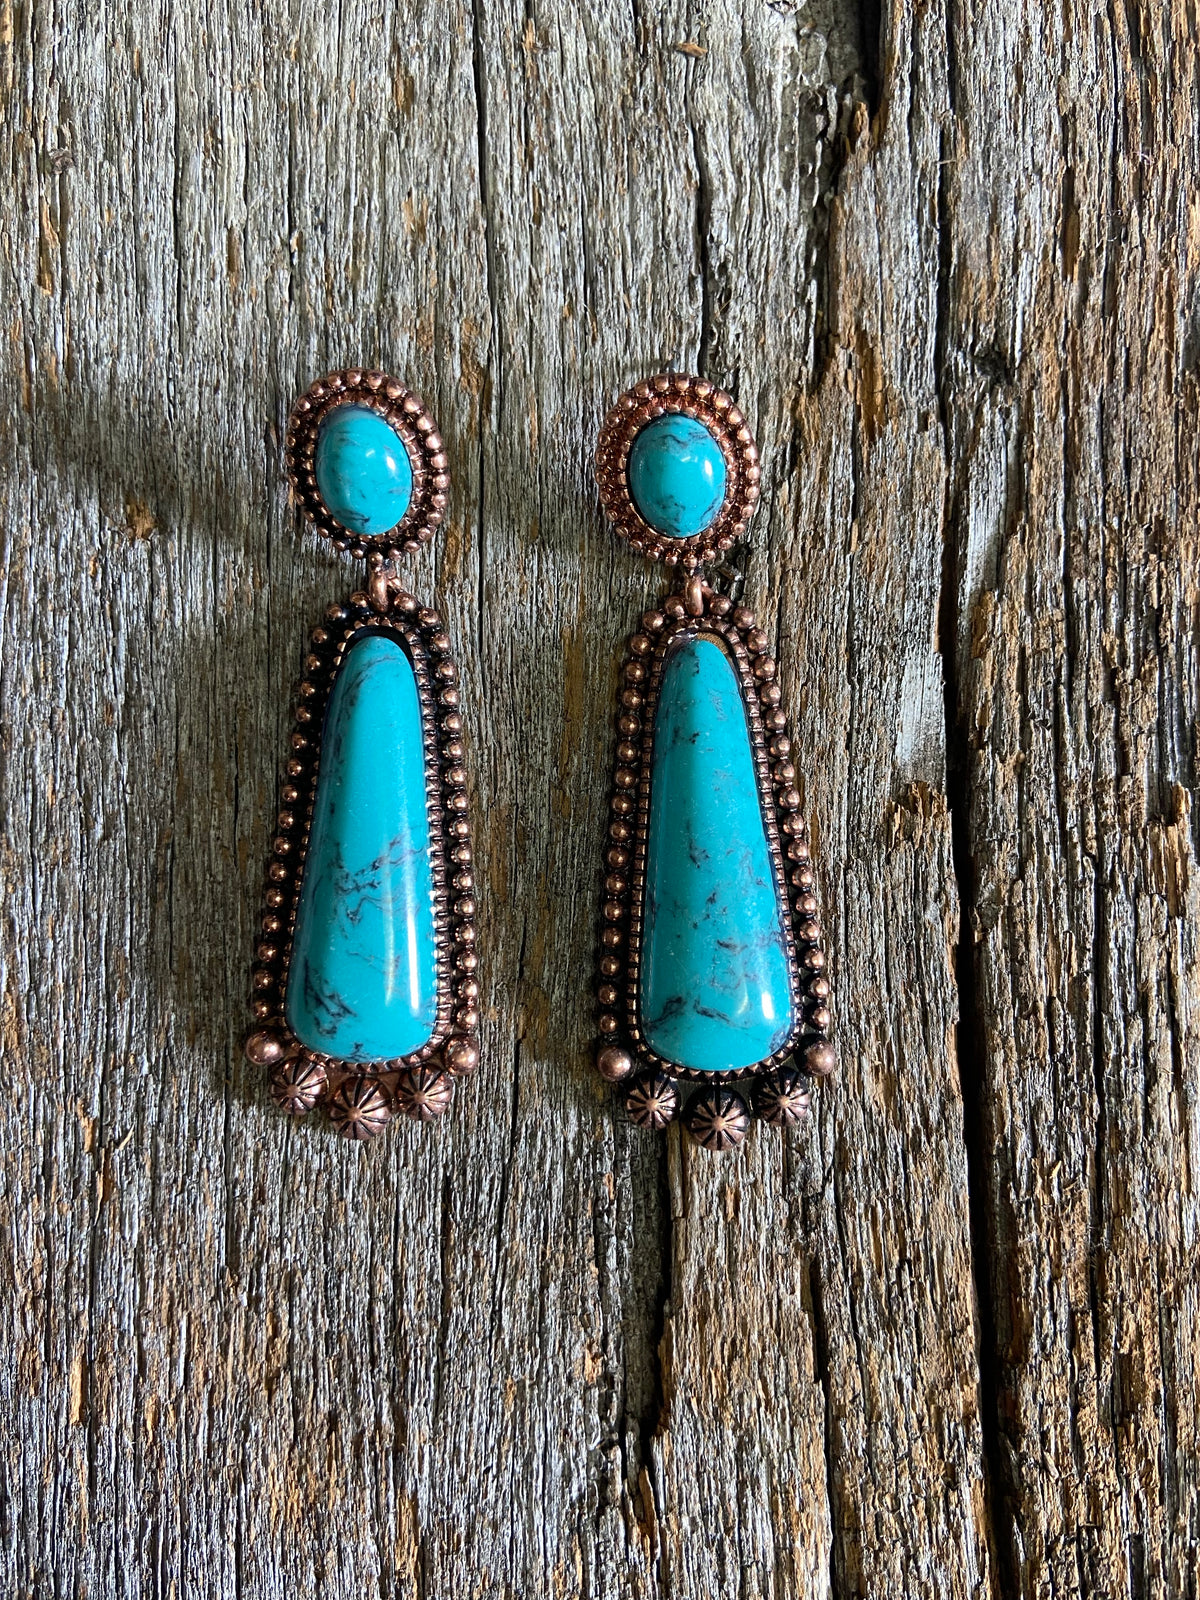 Western Earrings - Burnished Copper and Turquoise Stone Earring